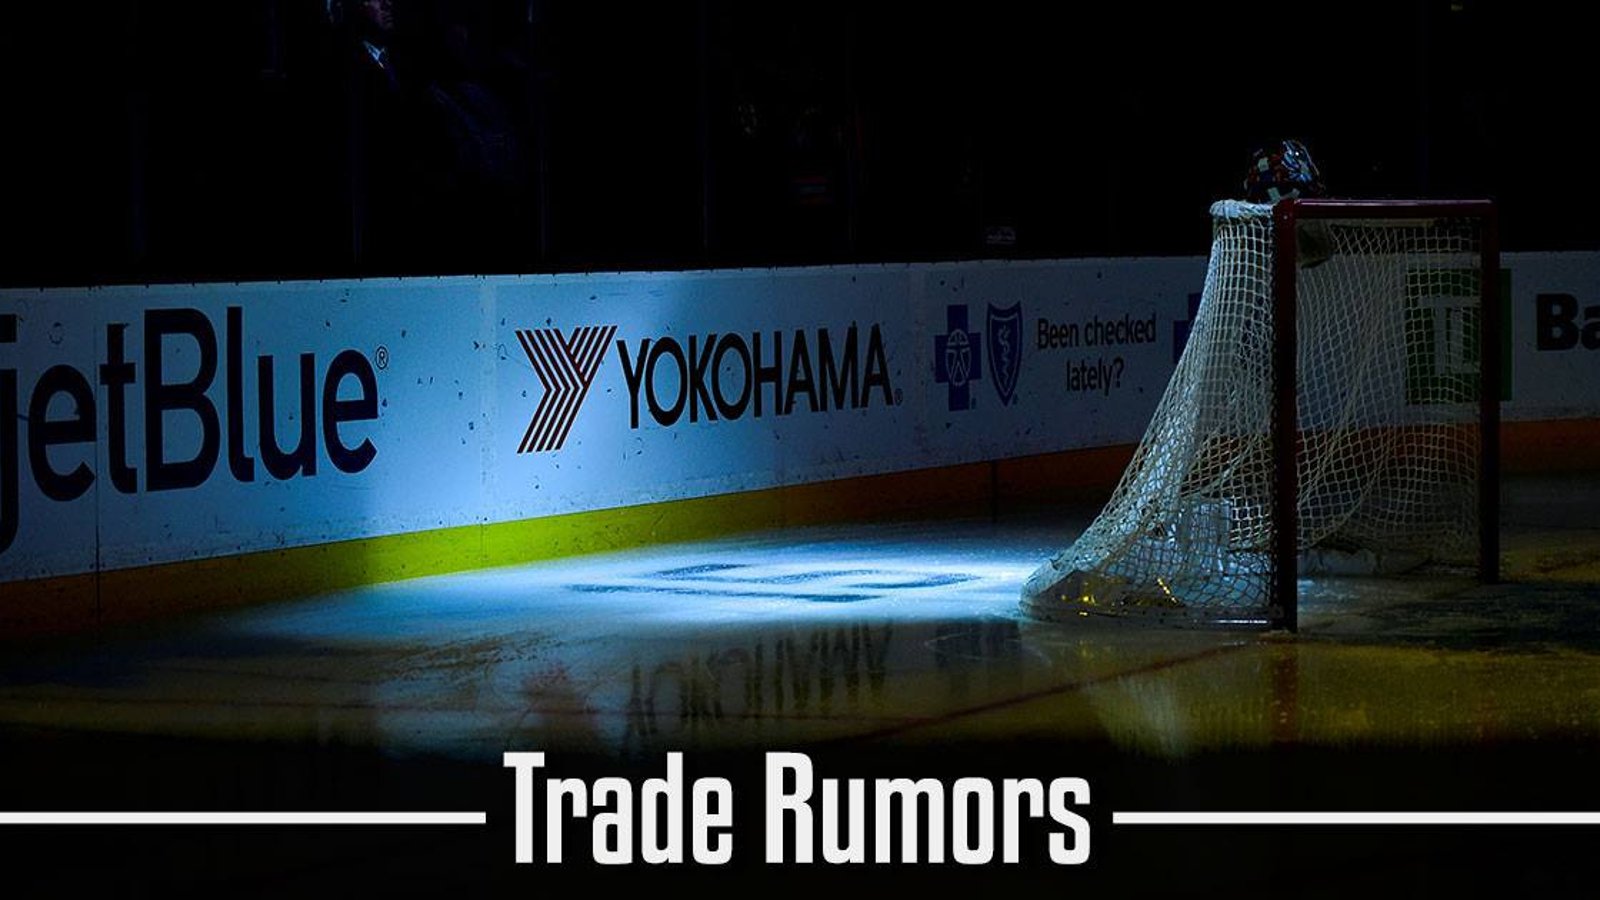 Rumors of a potential trade between the Pens and the Wings